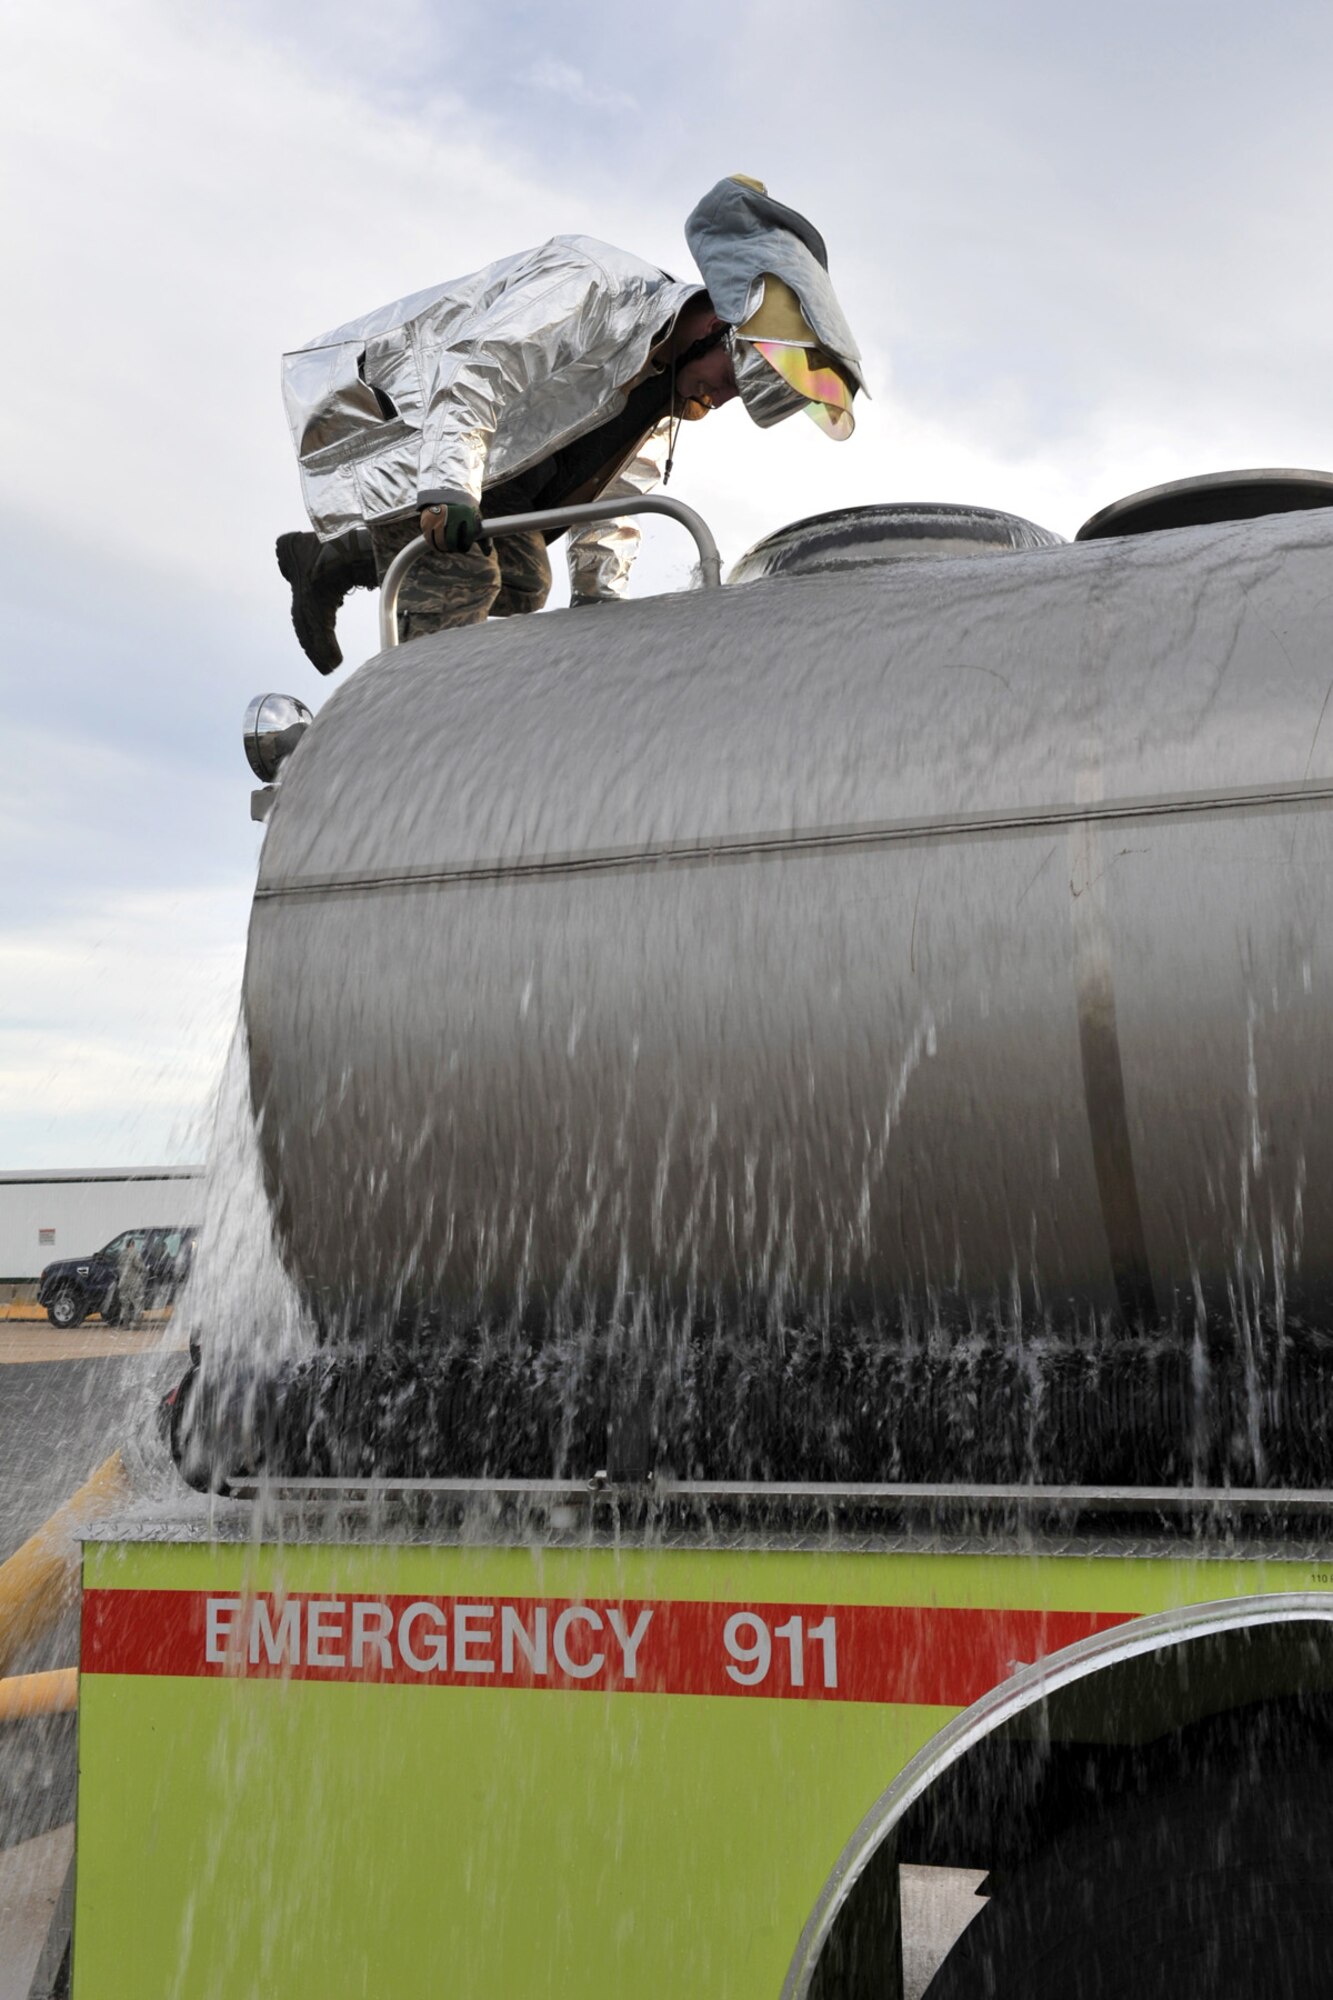 Airman 1st Class William Lawrence, Team Whiteman firefighter, climbs the back of a tanker to simulate a water re-supply operation Dec. 5 at Whiteman Air Force Base, Mo. The team is required to conduct upgrade training and exercises throughout the year to keep their skills up-to-date and mission-ready. (U.S. Air Force photo/Heidi Hunt) (Released)